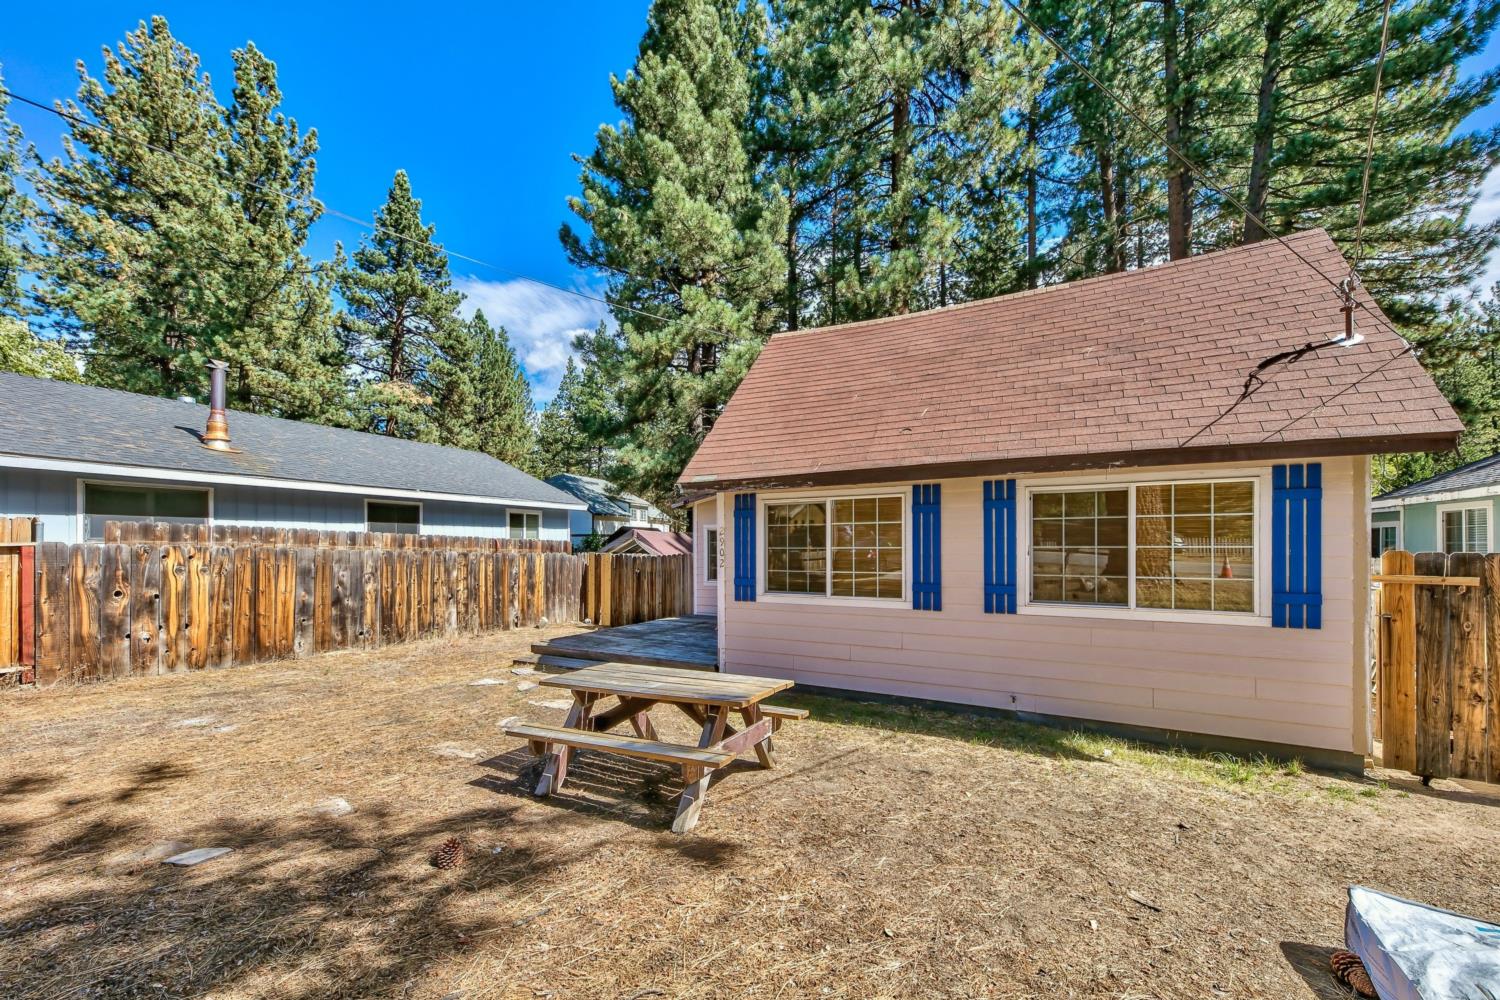 2902 oakland - cozy tahoe cabin close to beaches